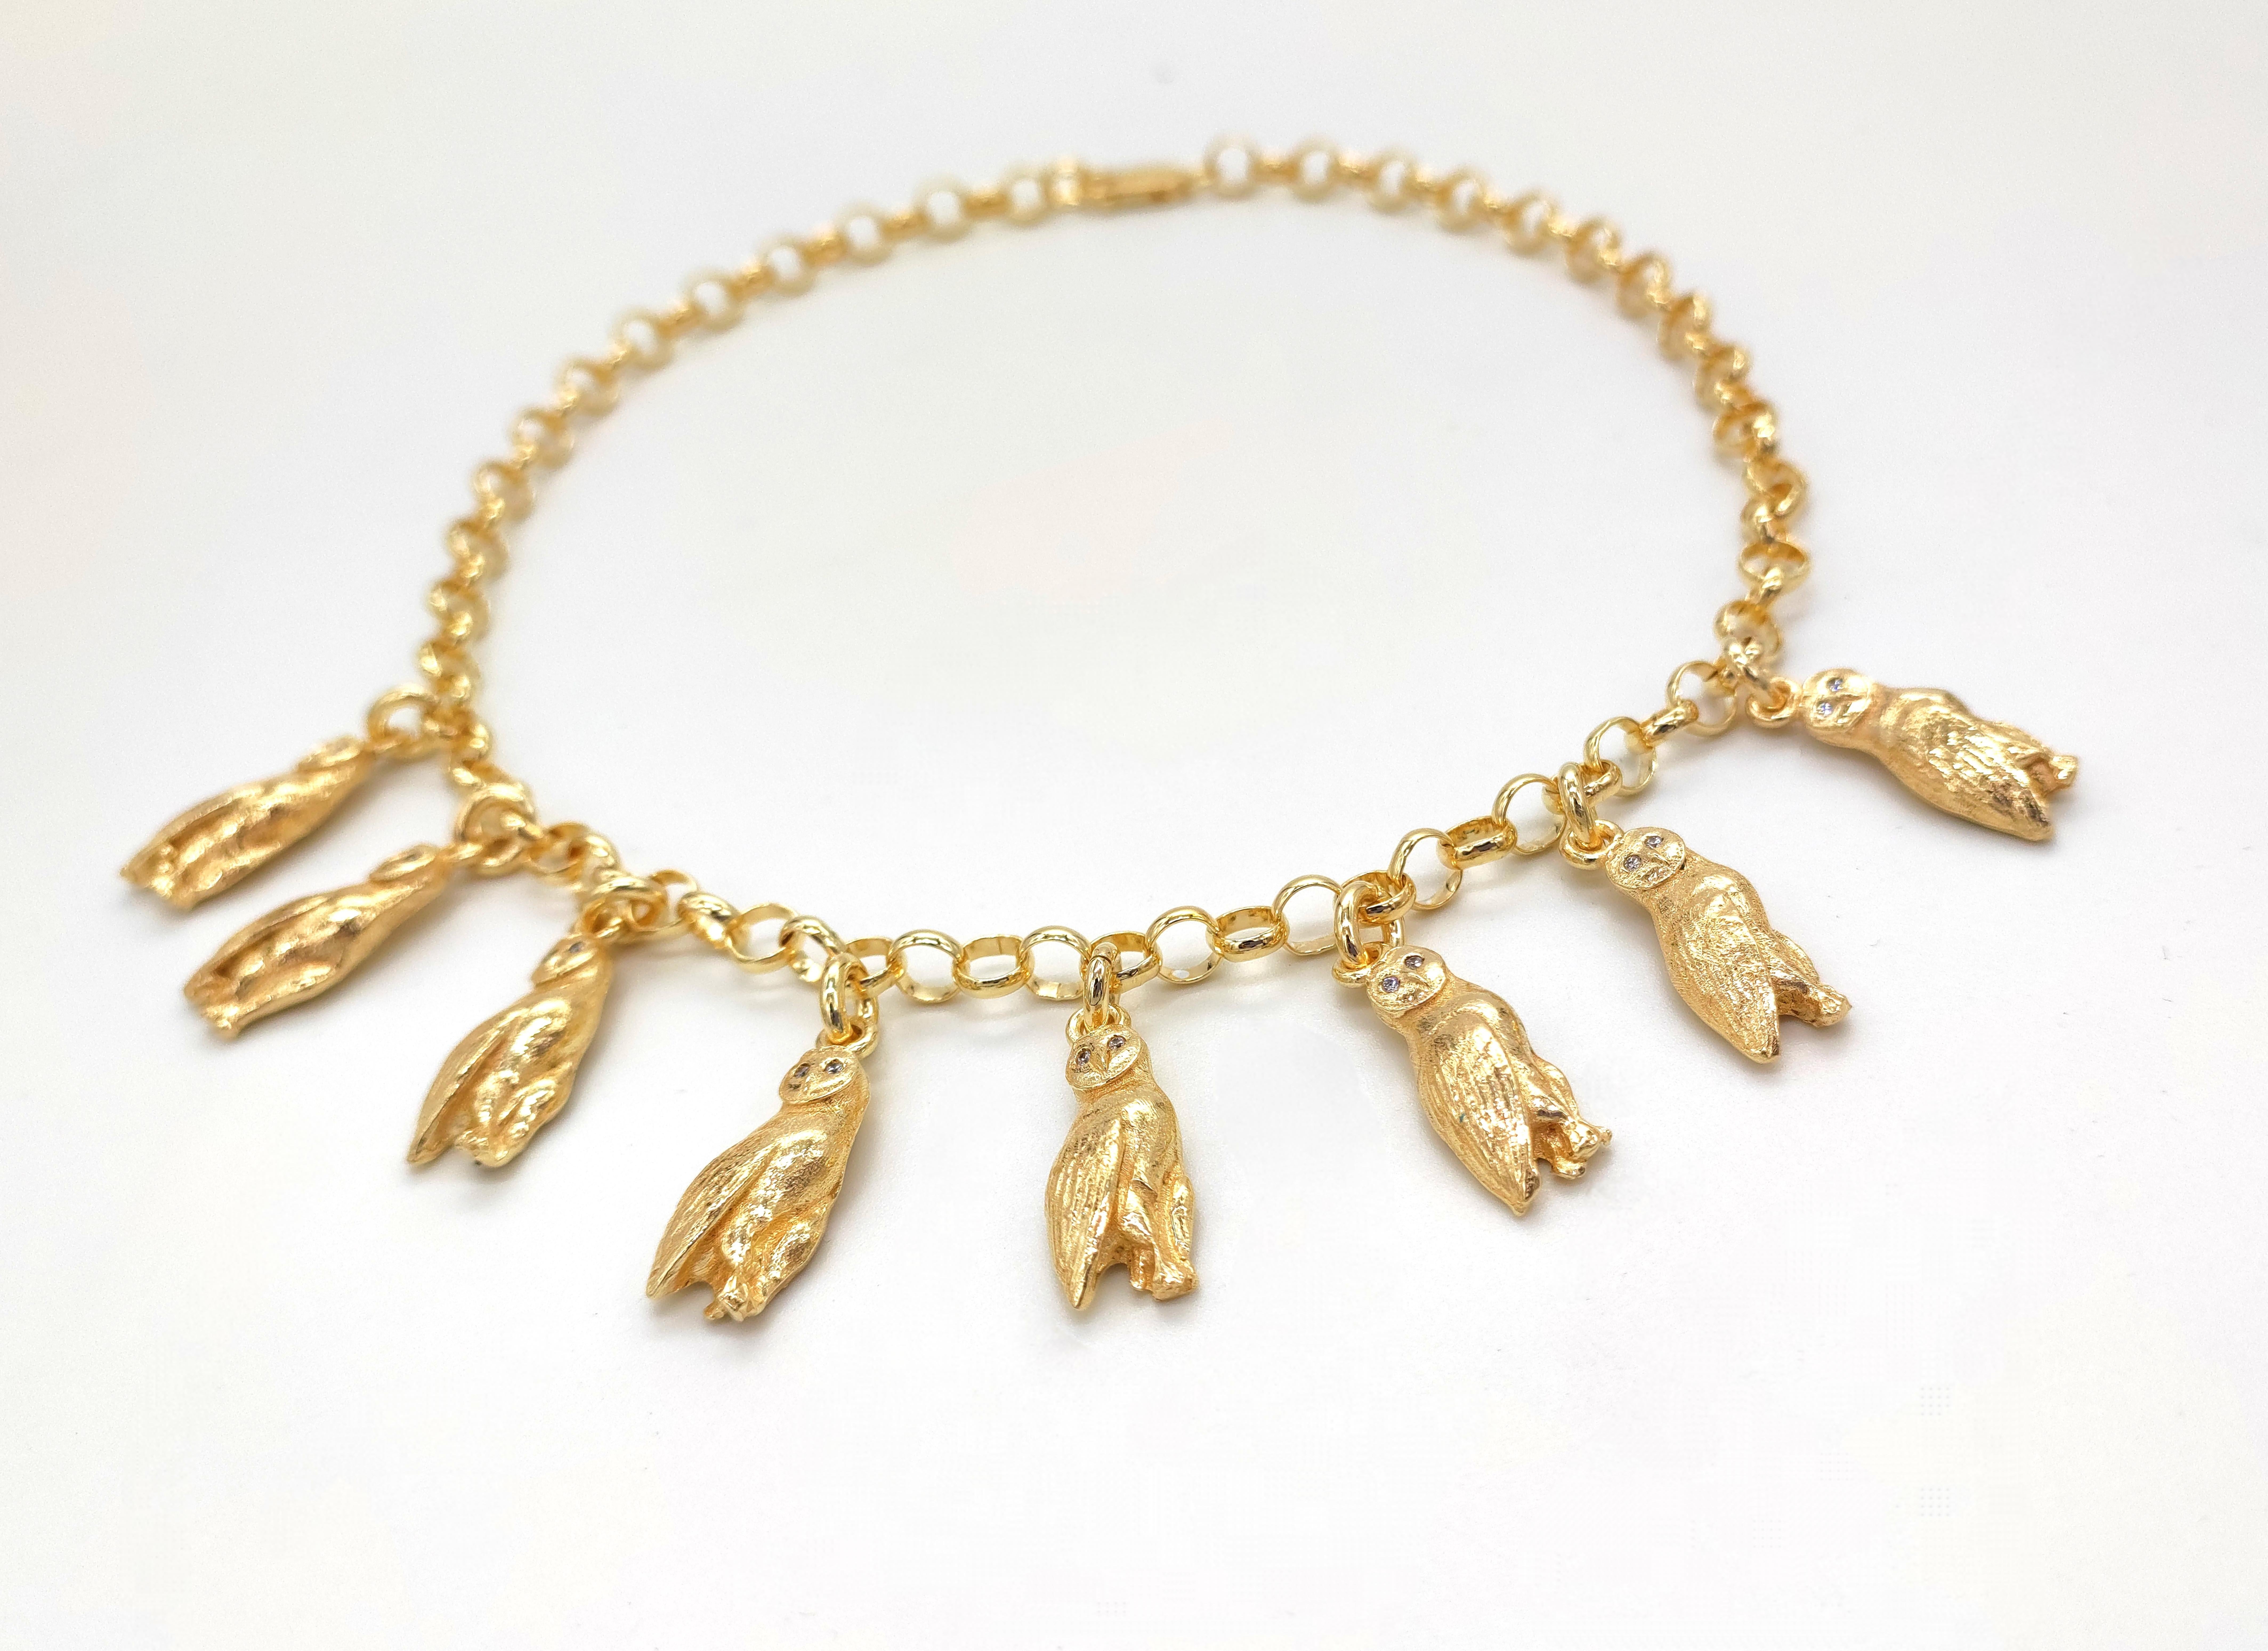 Animalia Series
Important 14 kt solid yellow gold choker necklace.
Necklace created entirely by hand by Italian artisans. 
The technique is that of lost-wax microsculpture. The Barn Owl's eyes are set with diamonds totaling 16 stones.
The necklace